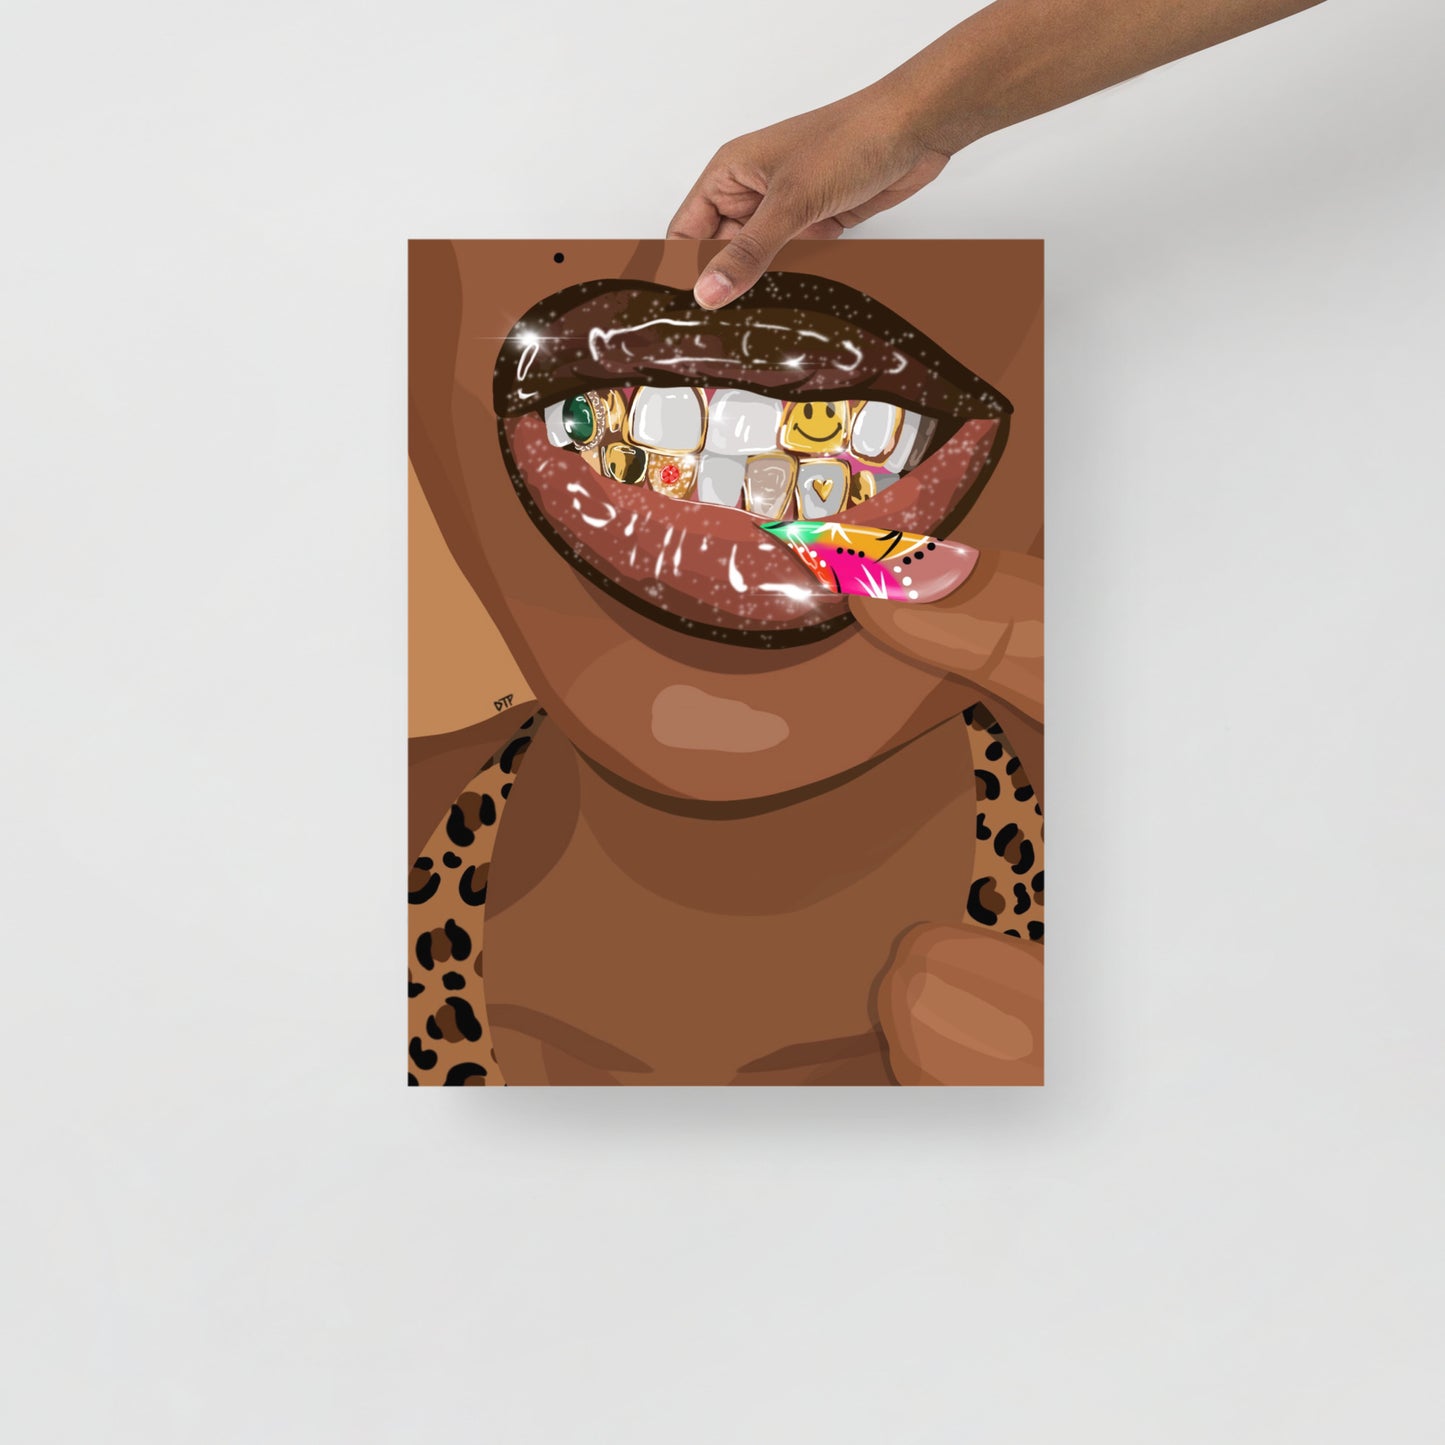 “Grillz” Poster